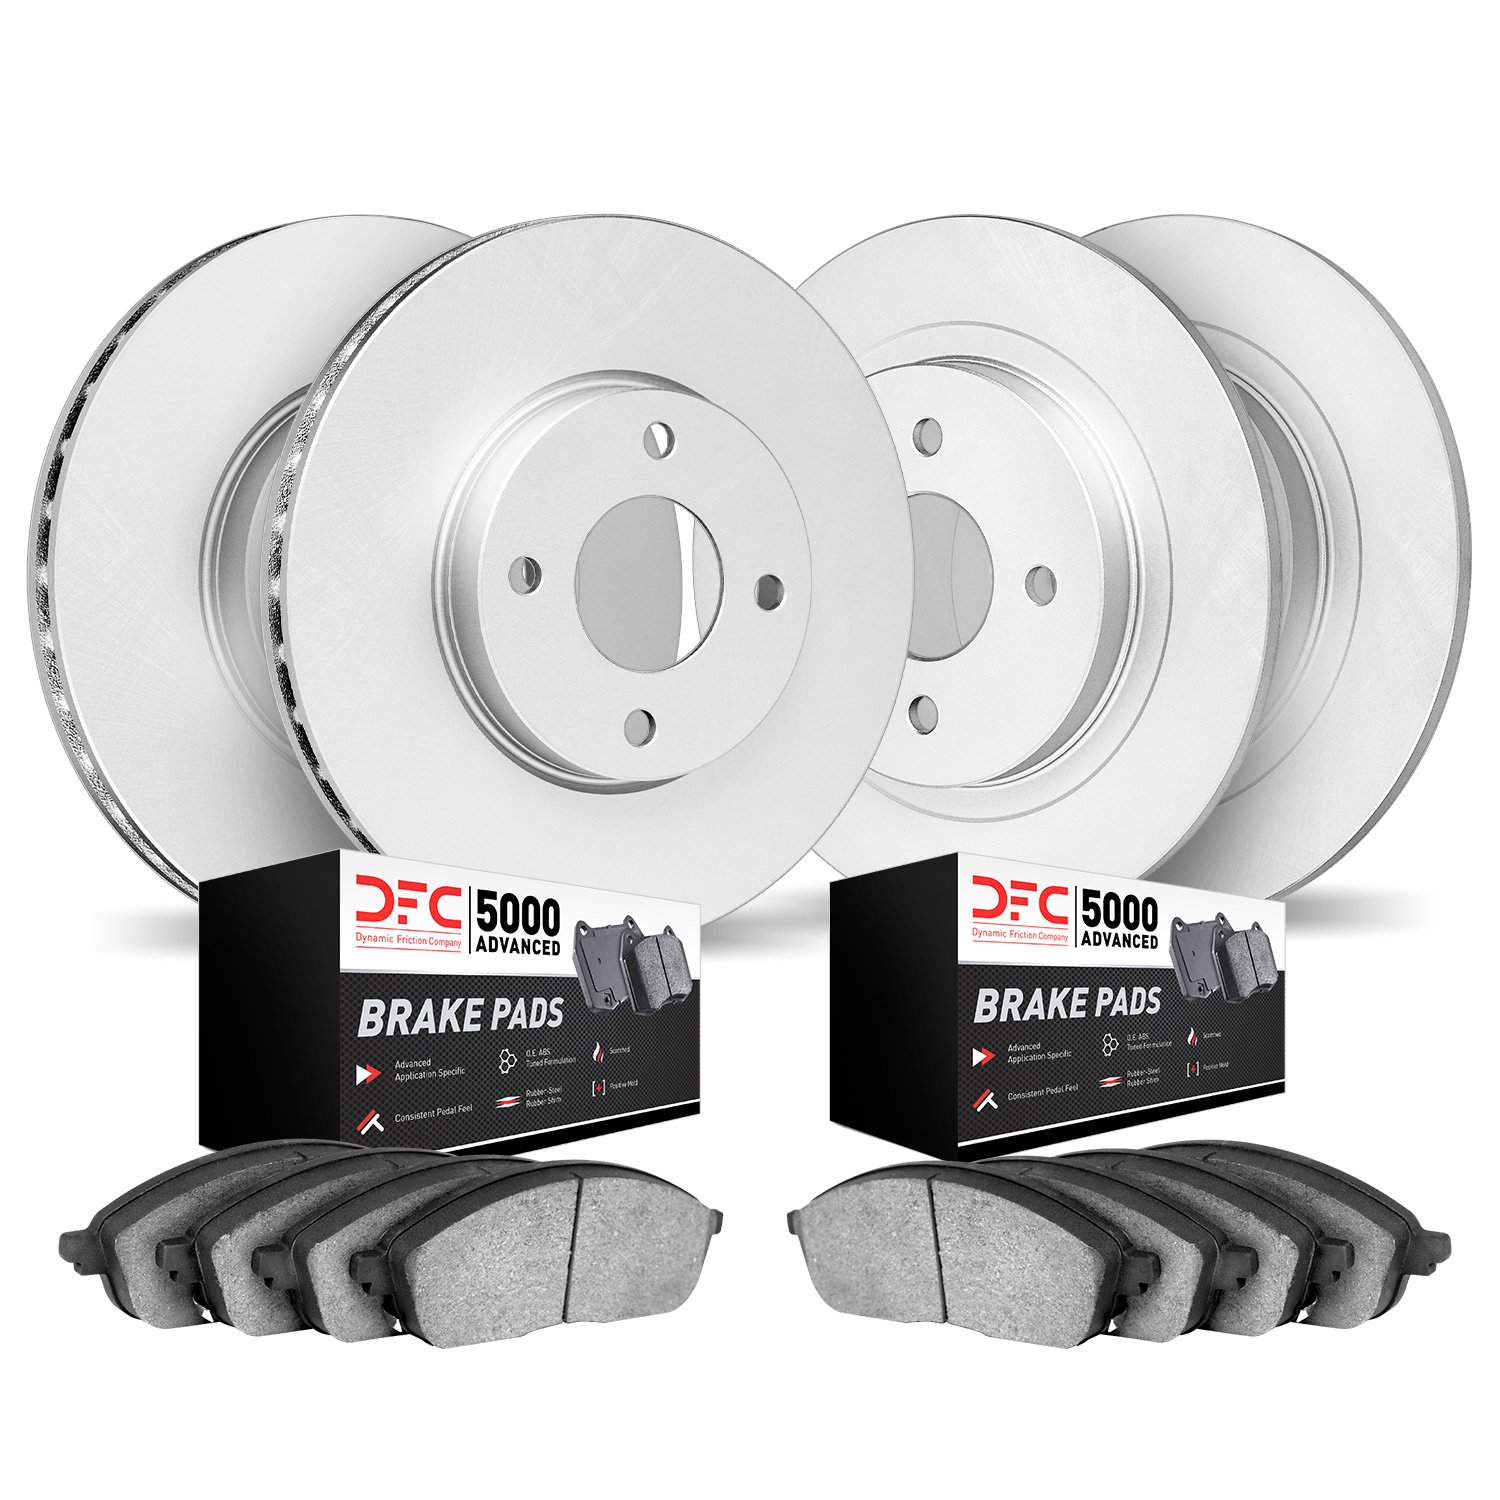 4504-54003 Geospec Brake Rotors w/5000 Advanced Brake Pads Kit, 1992-1995 Ford/Lincoln/Mercury/Mazda, Position: Front and Rear